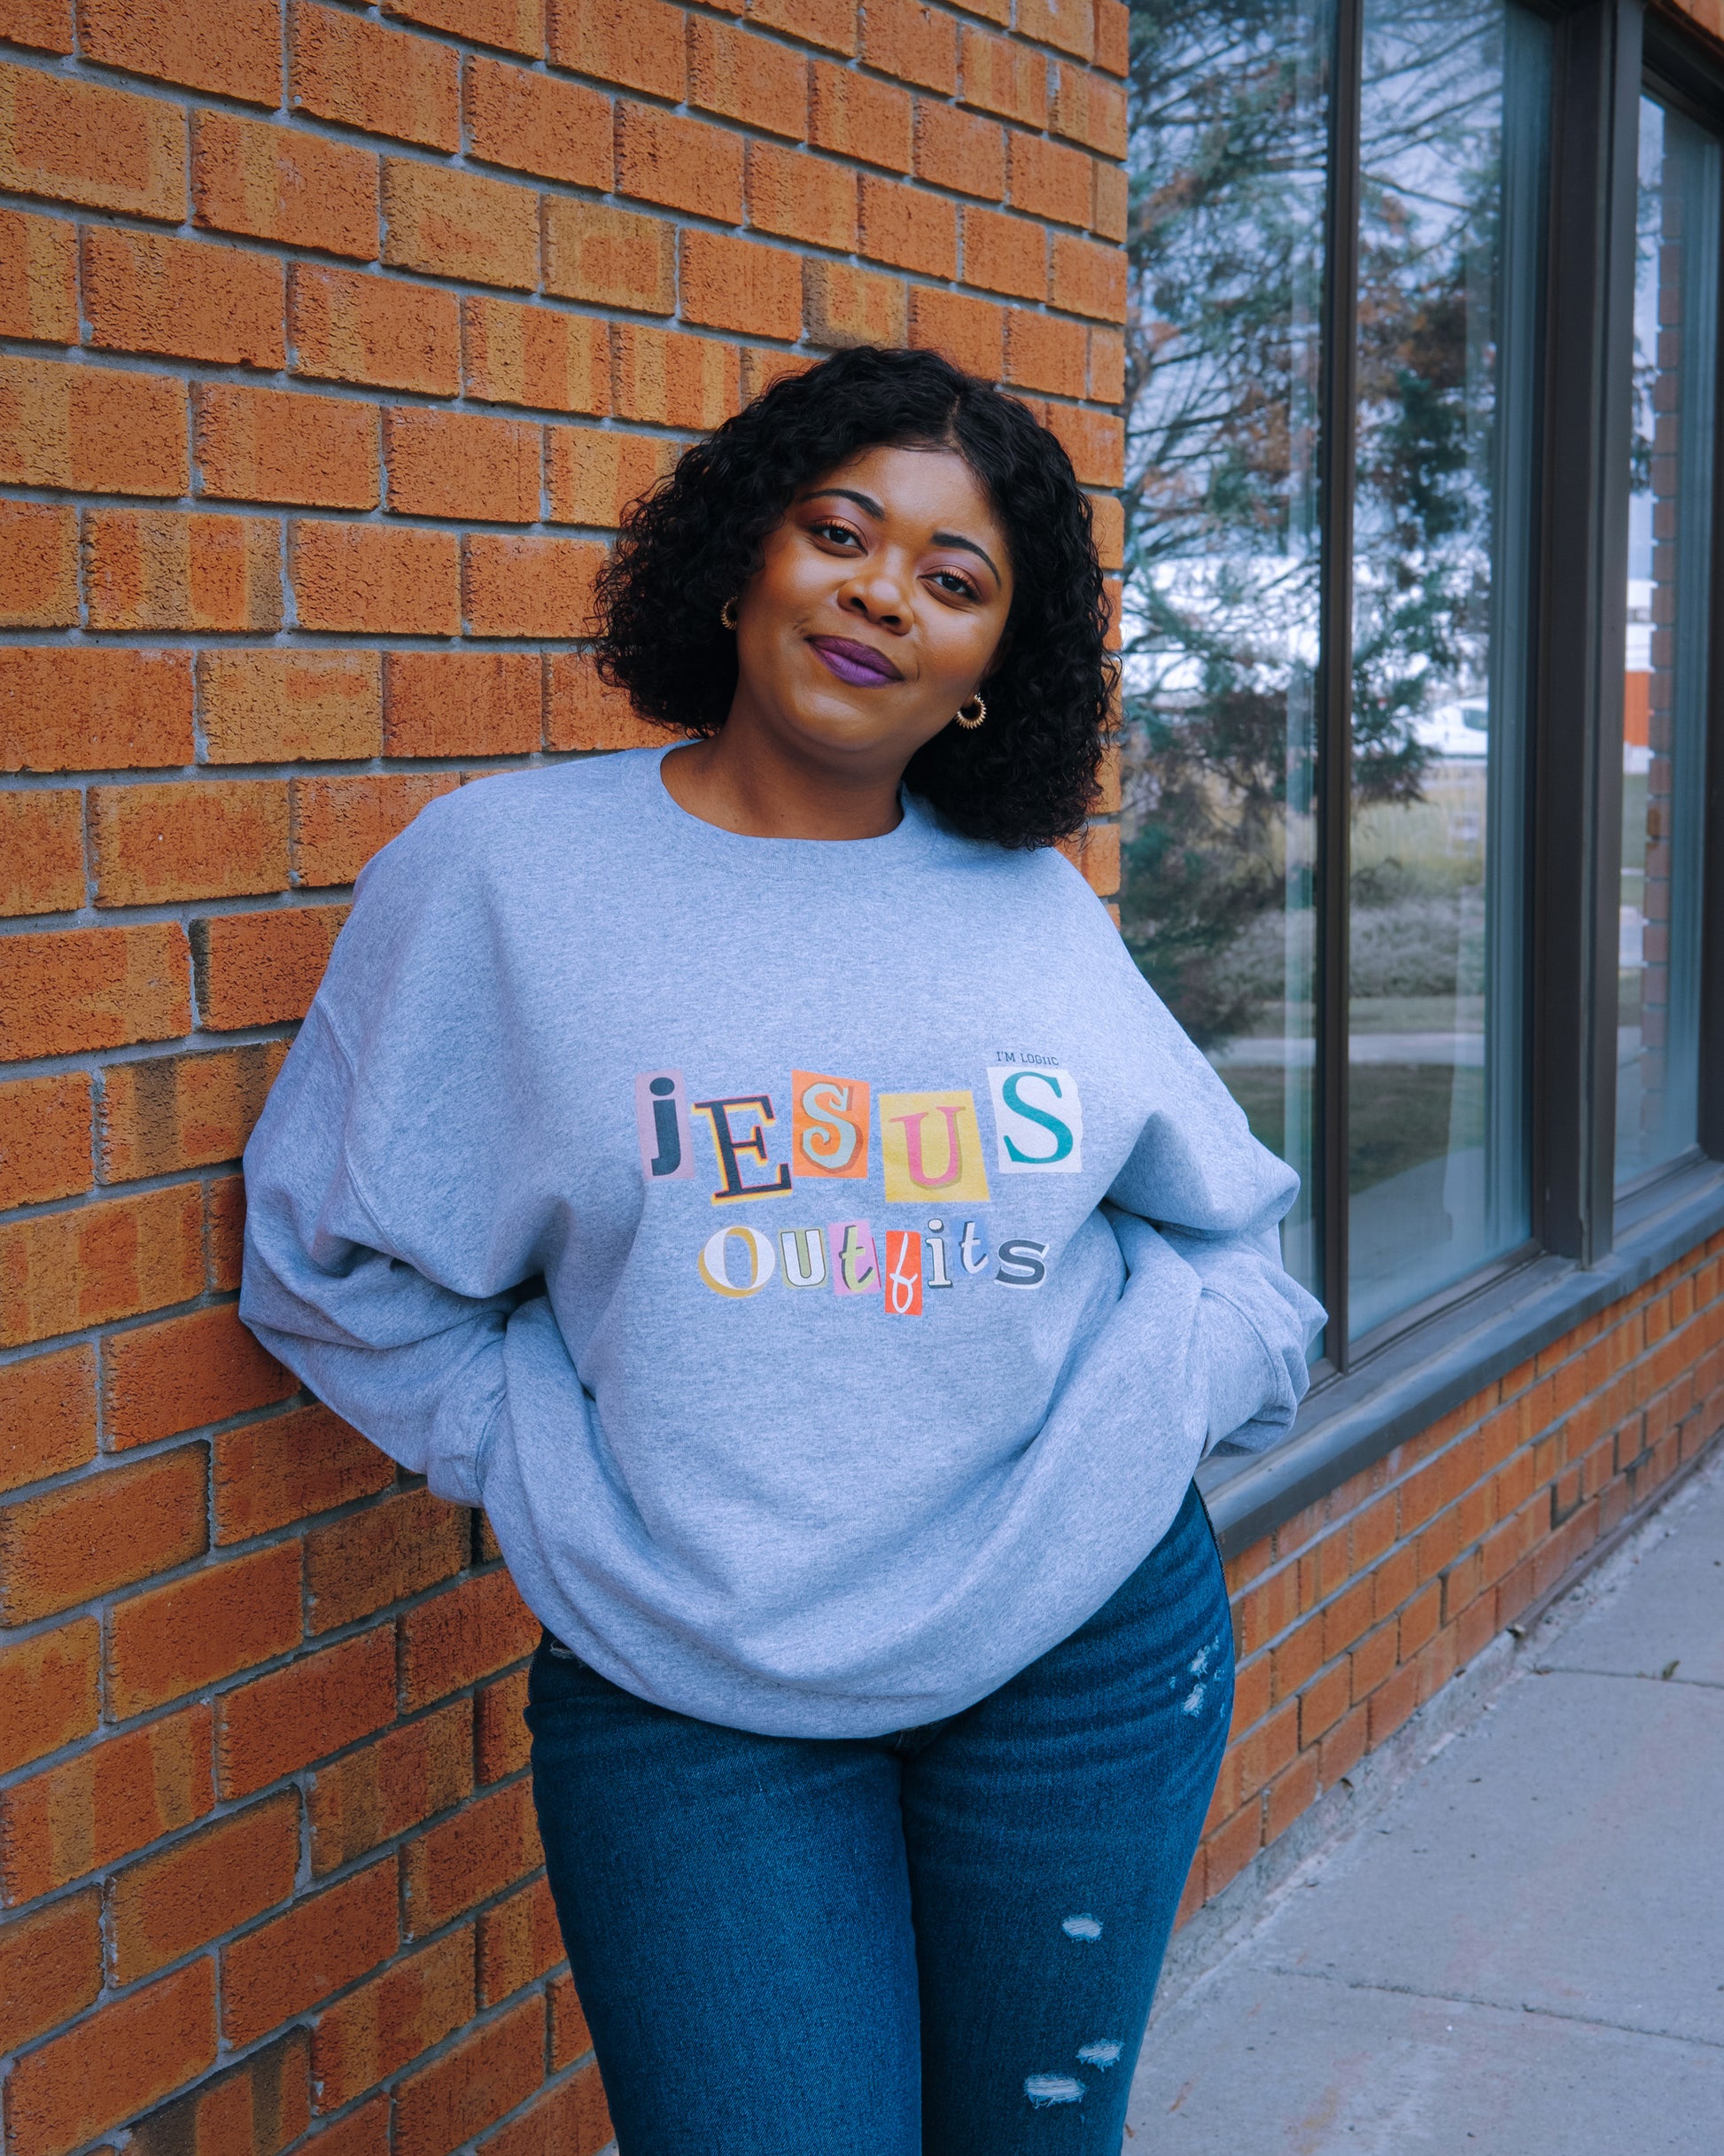 Jesus Outfits Crew Neck - Shirts & Tops